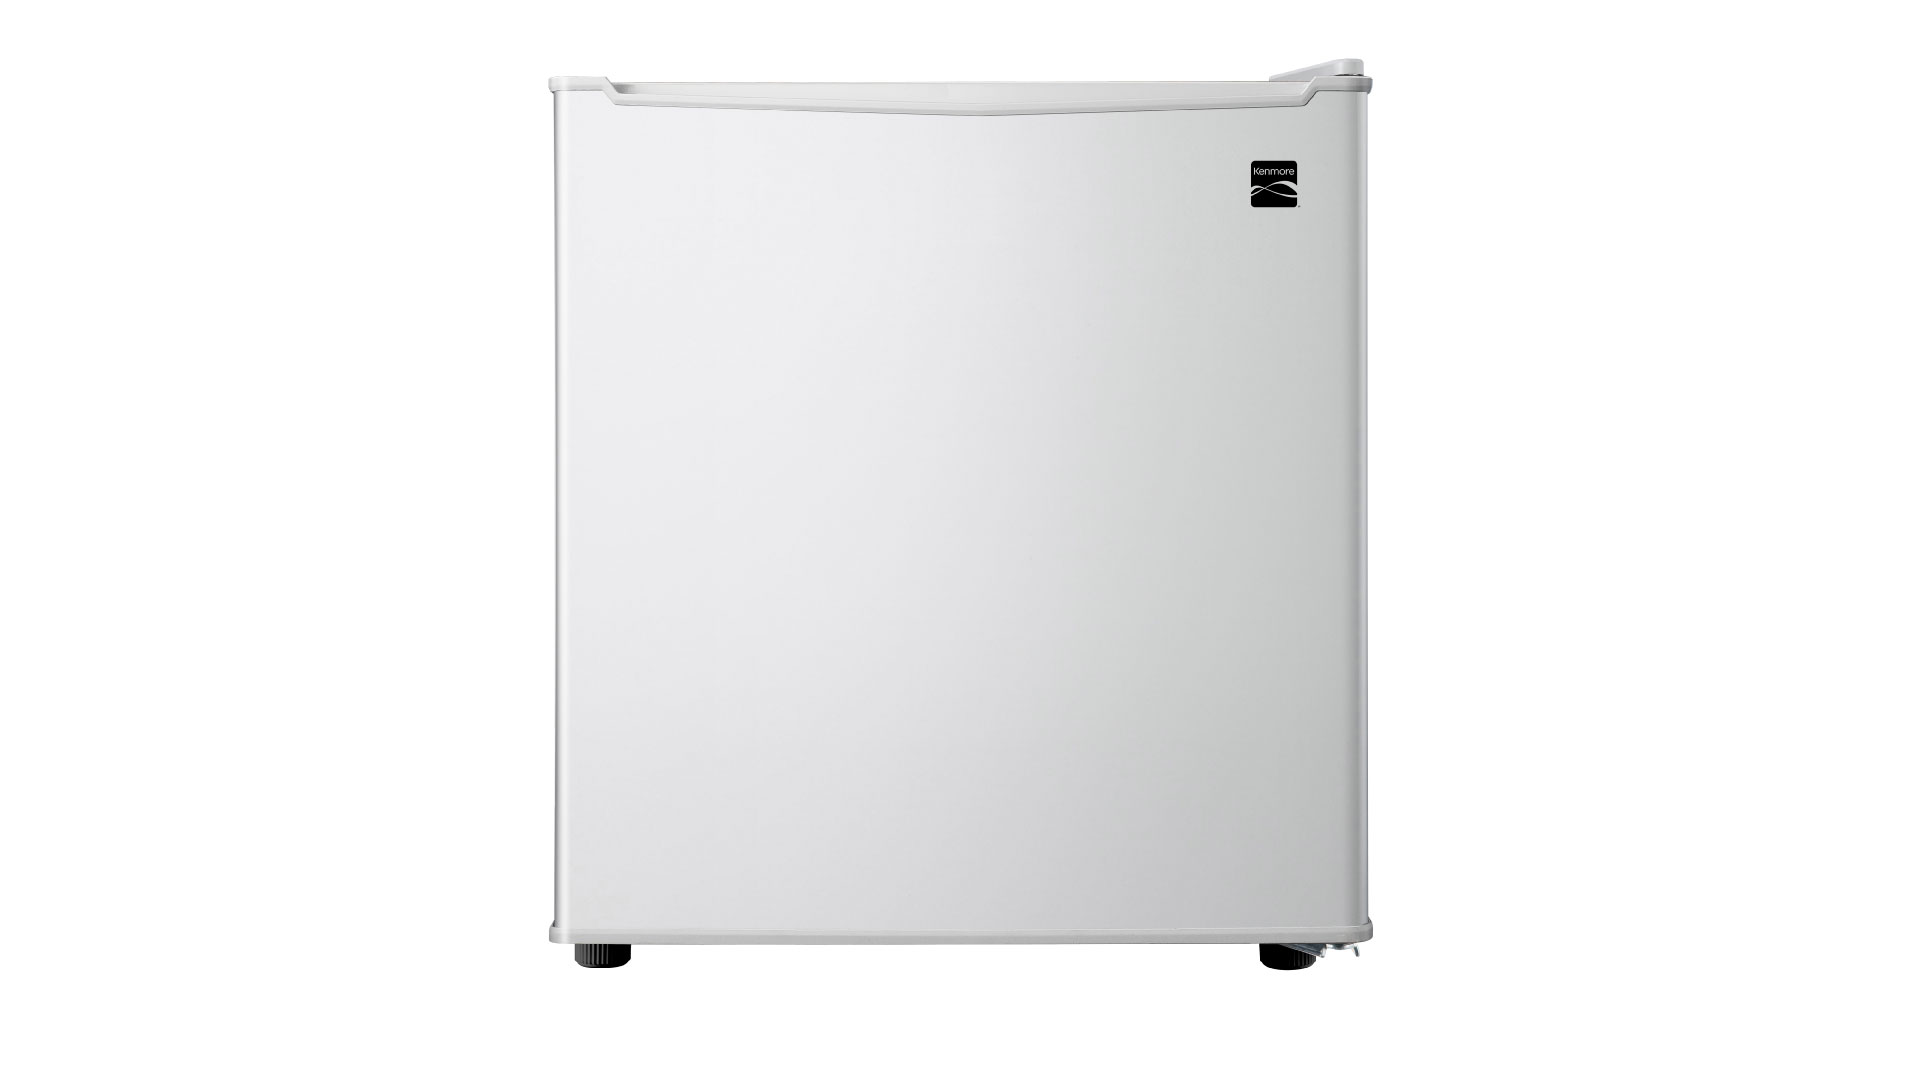 The Kenmore 1.7 cubic foot fridge in white.